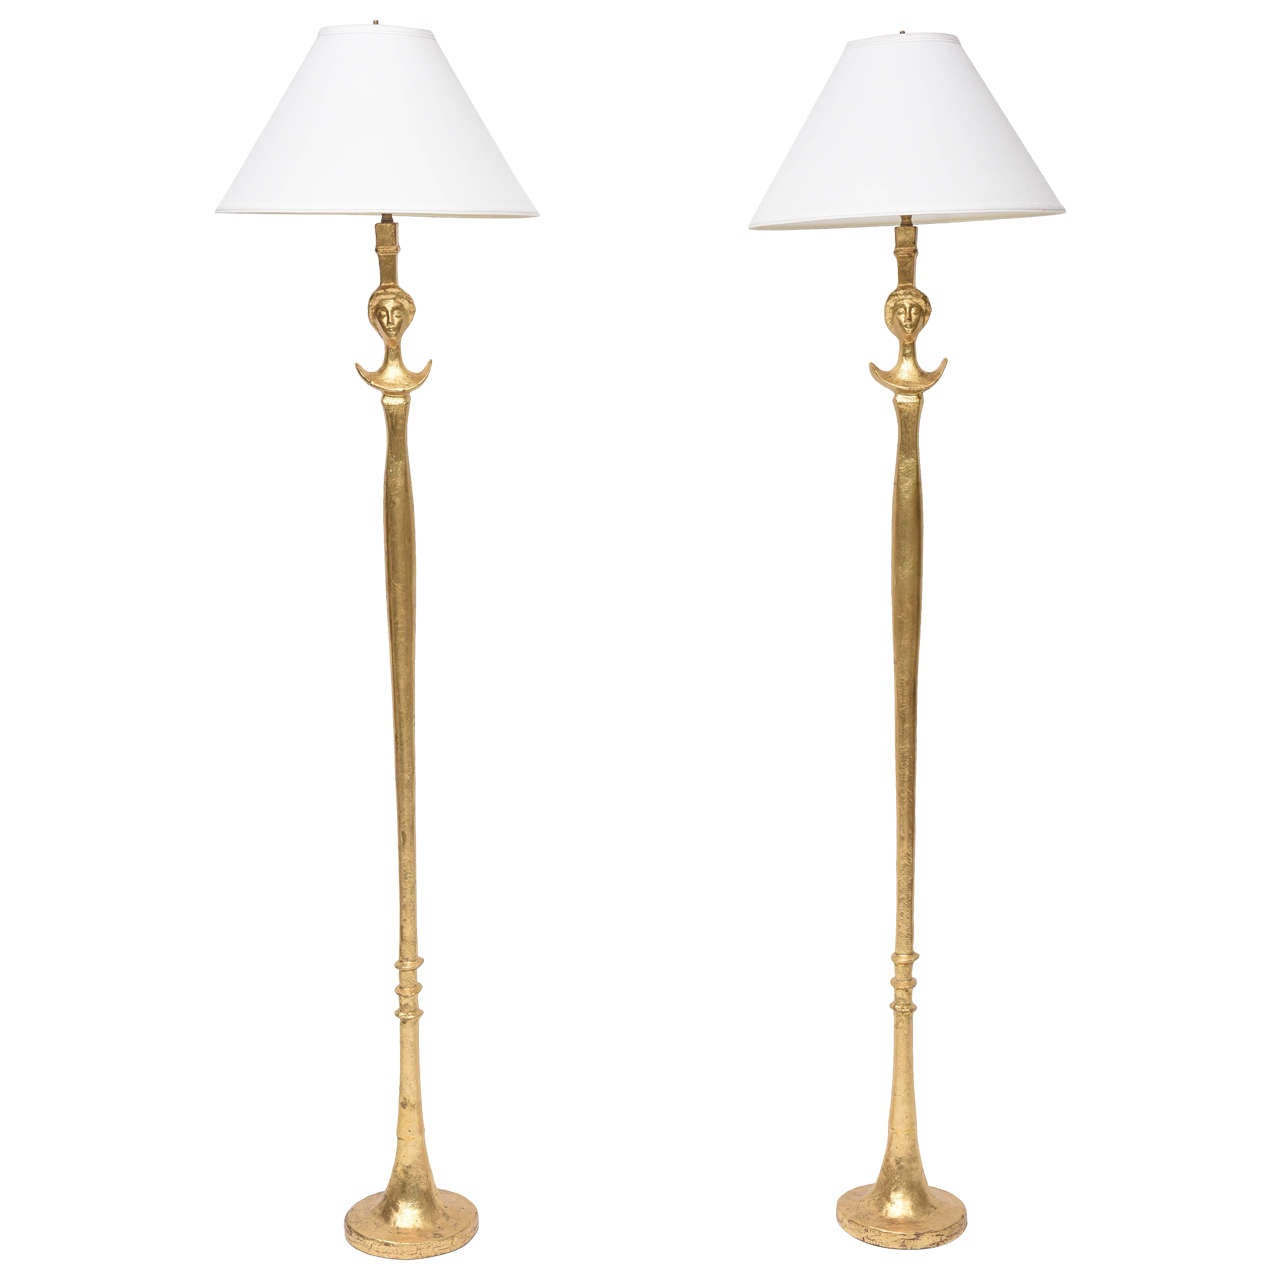 Pair of Gold Leaf Tete De Femme Floor Lamps in the Style of Diego Giacometti